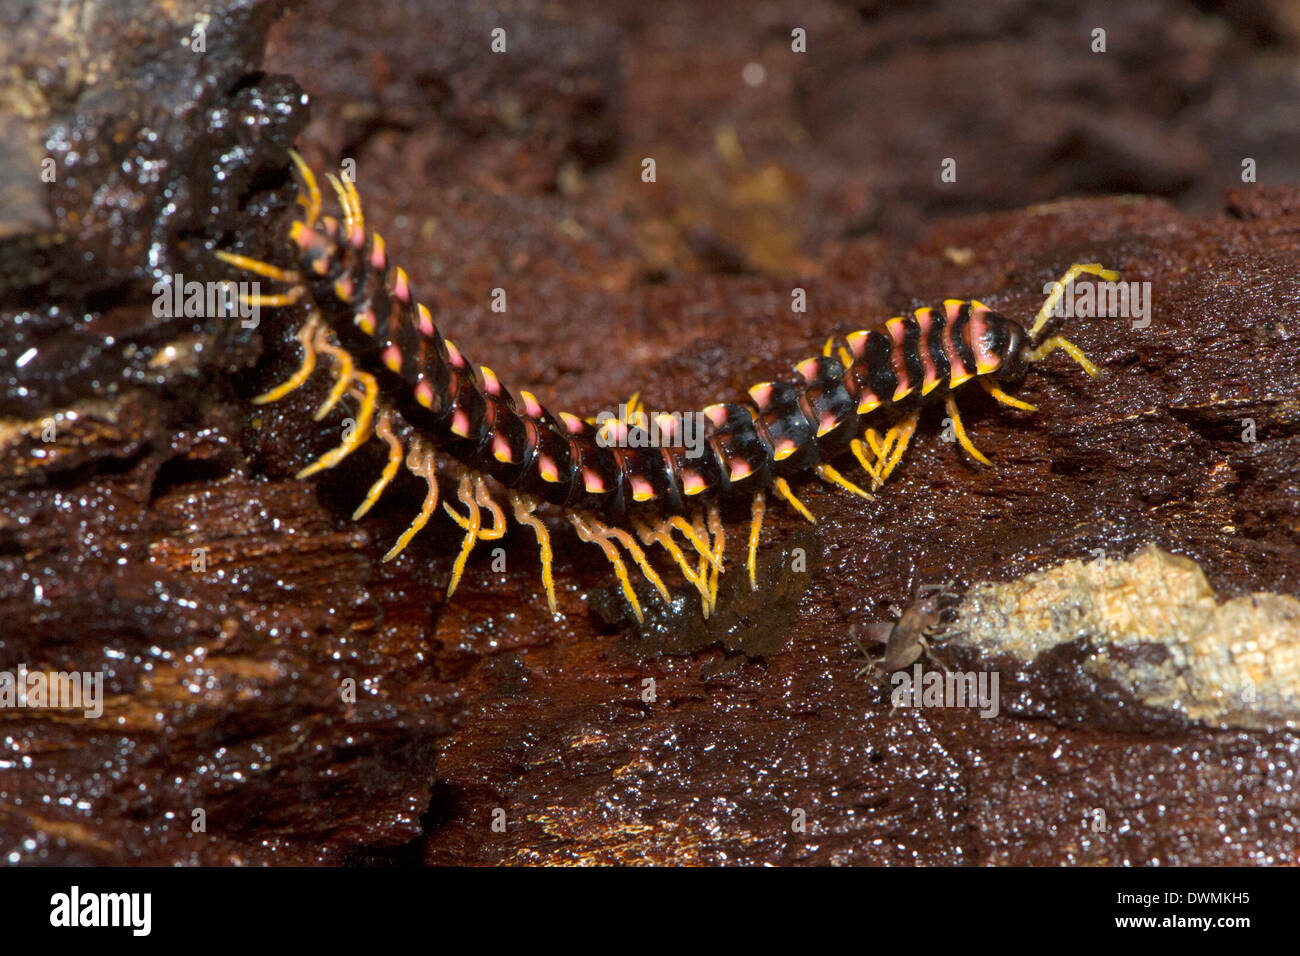 Forest centipede on rotting wood on forest floor, Sabah, Borneo, Malaysia, Southeast Asia, Asia Stock Photo